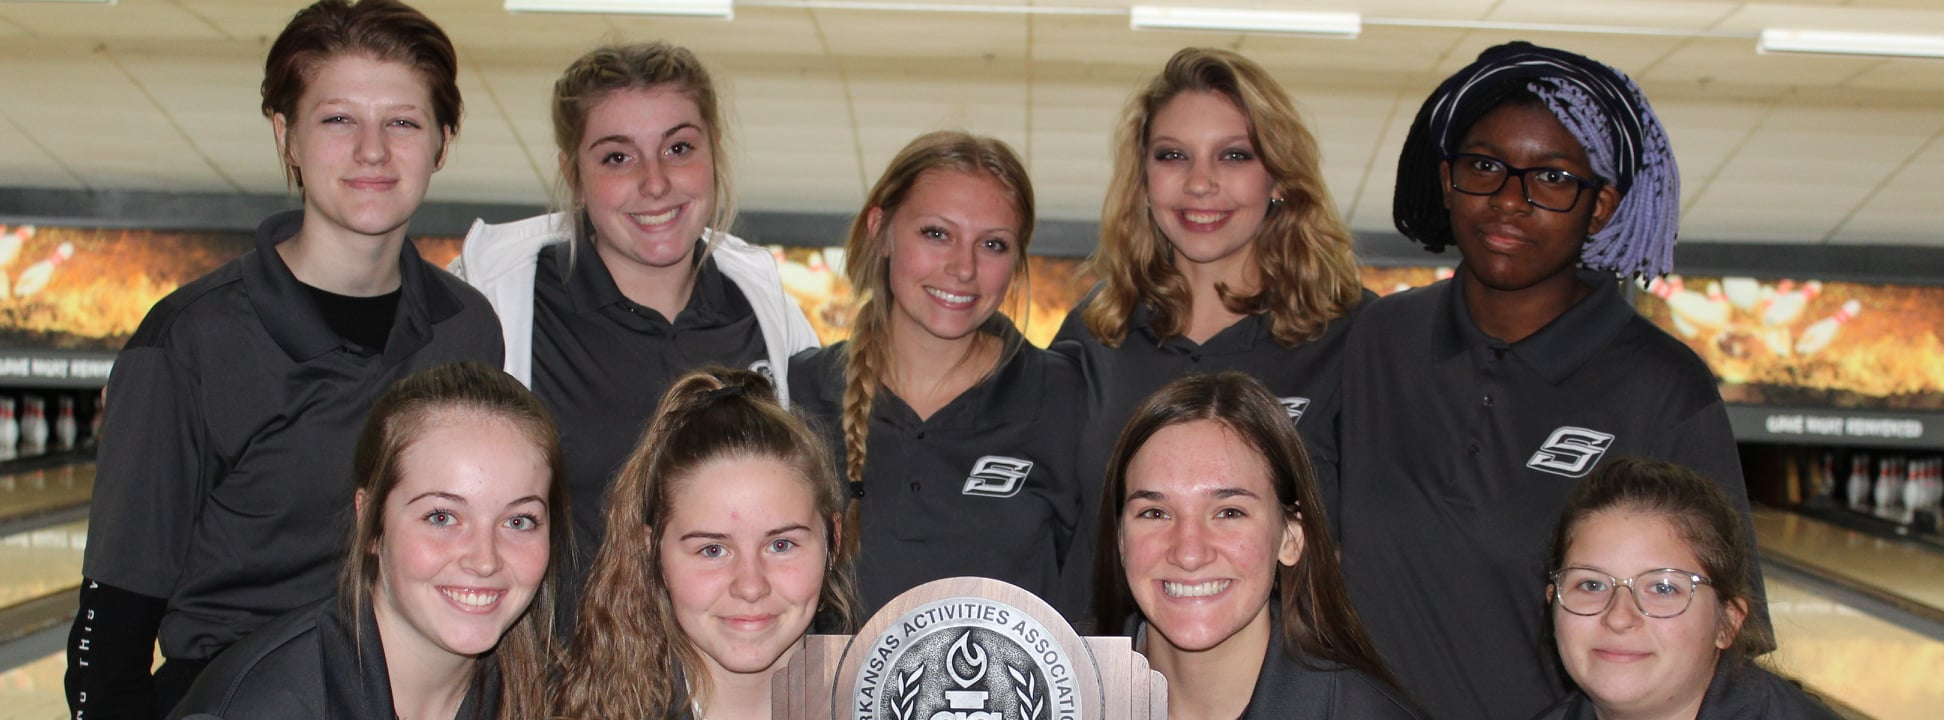 bowling team posing with trophy